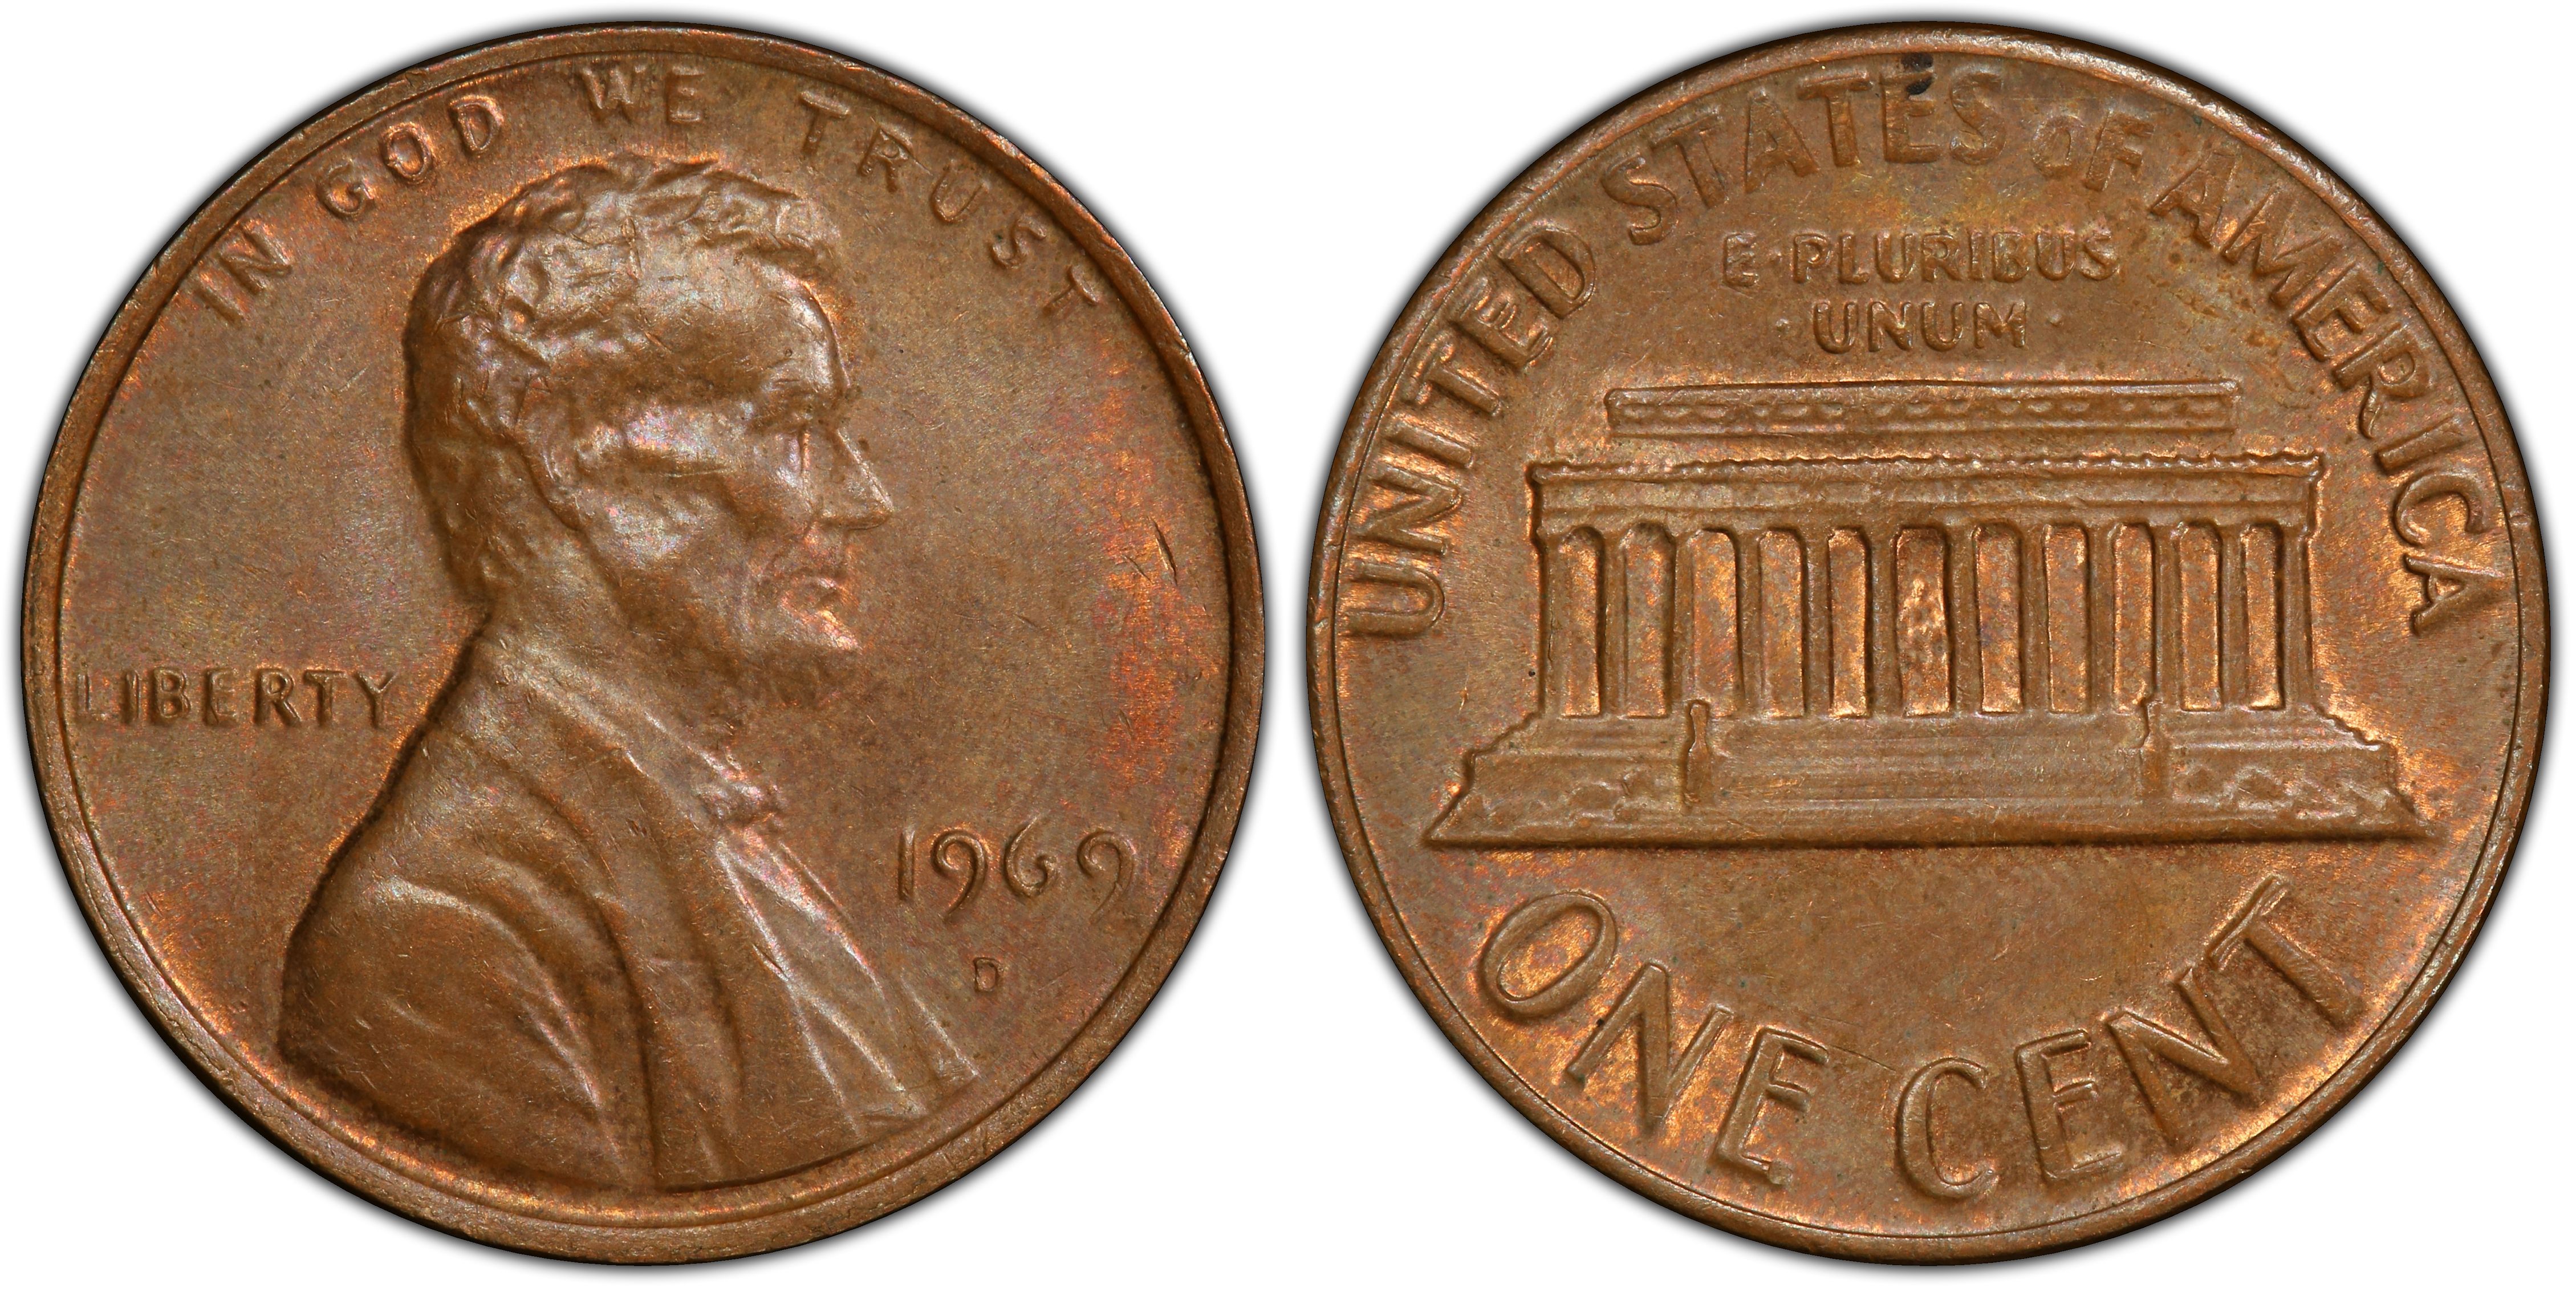 1969 D 1c No Fg Fs 901 Bn Regular Strike Lincoln Cent Modern Pcgs Coinfacts,How To Clean Fish Tank Filter